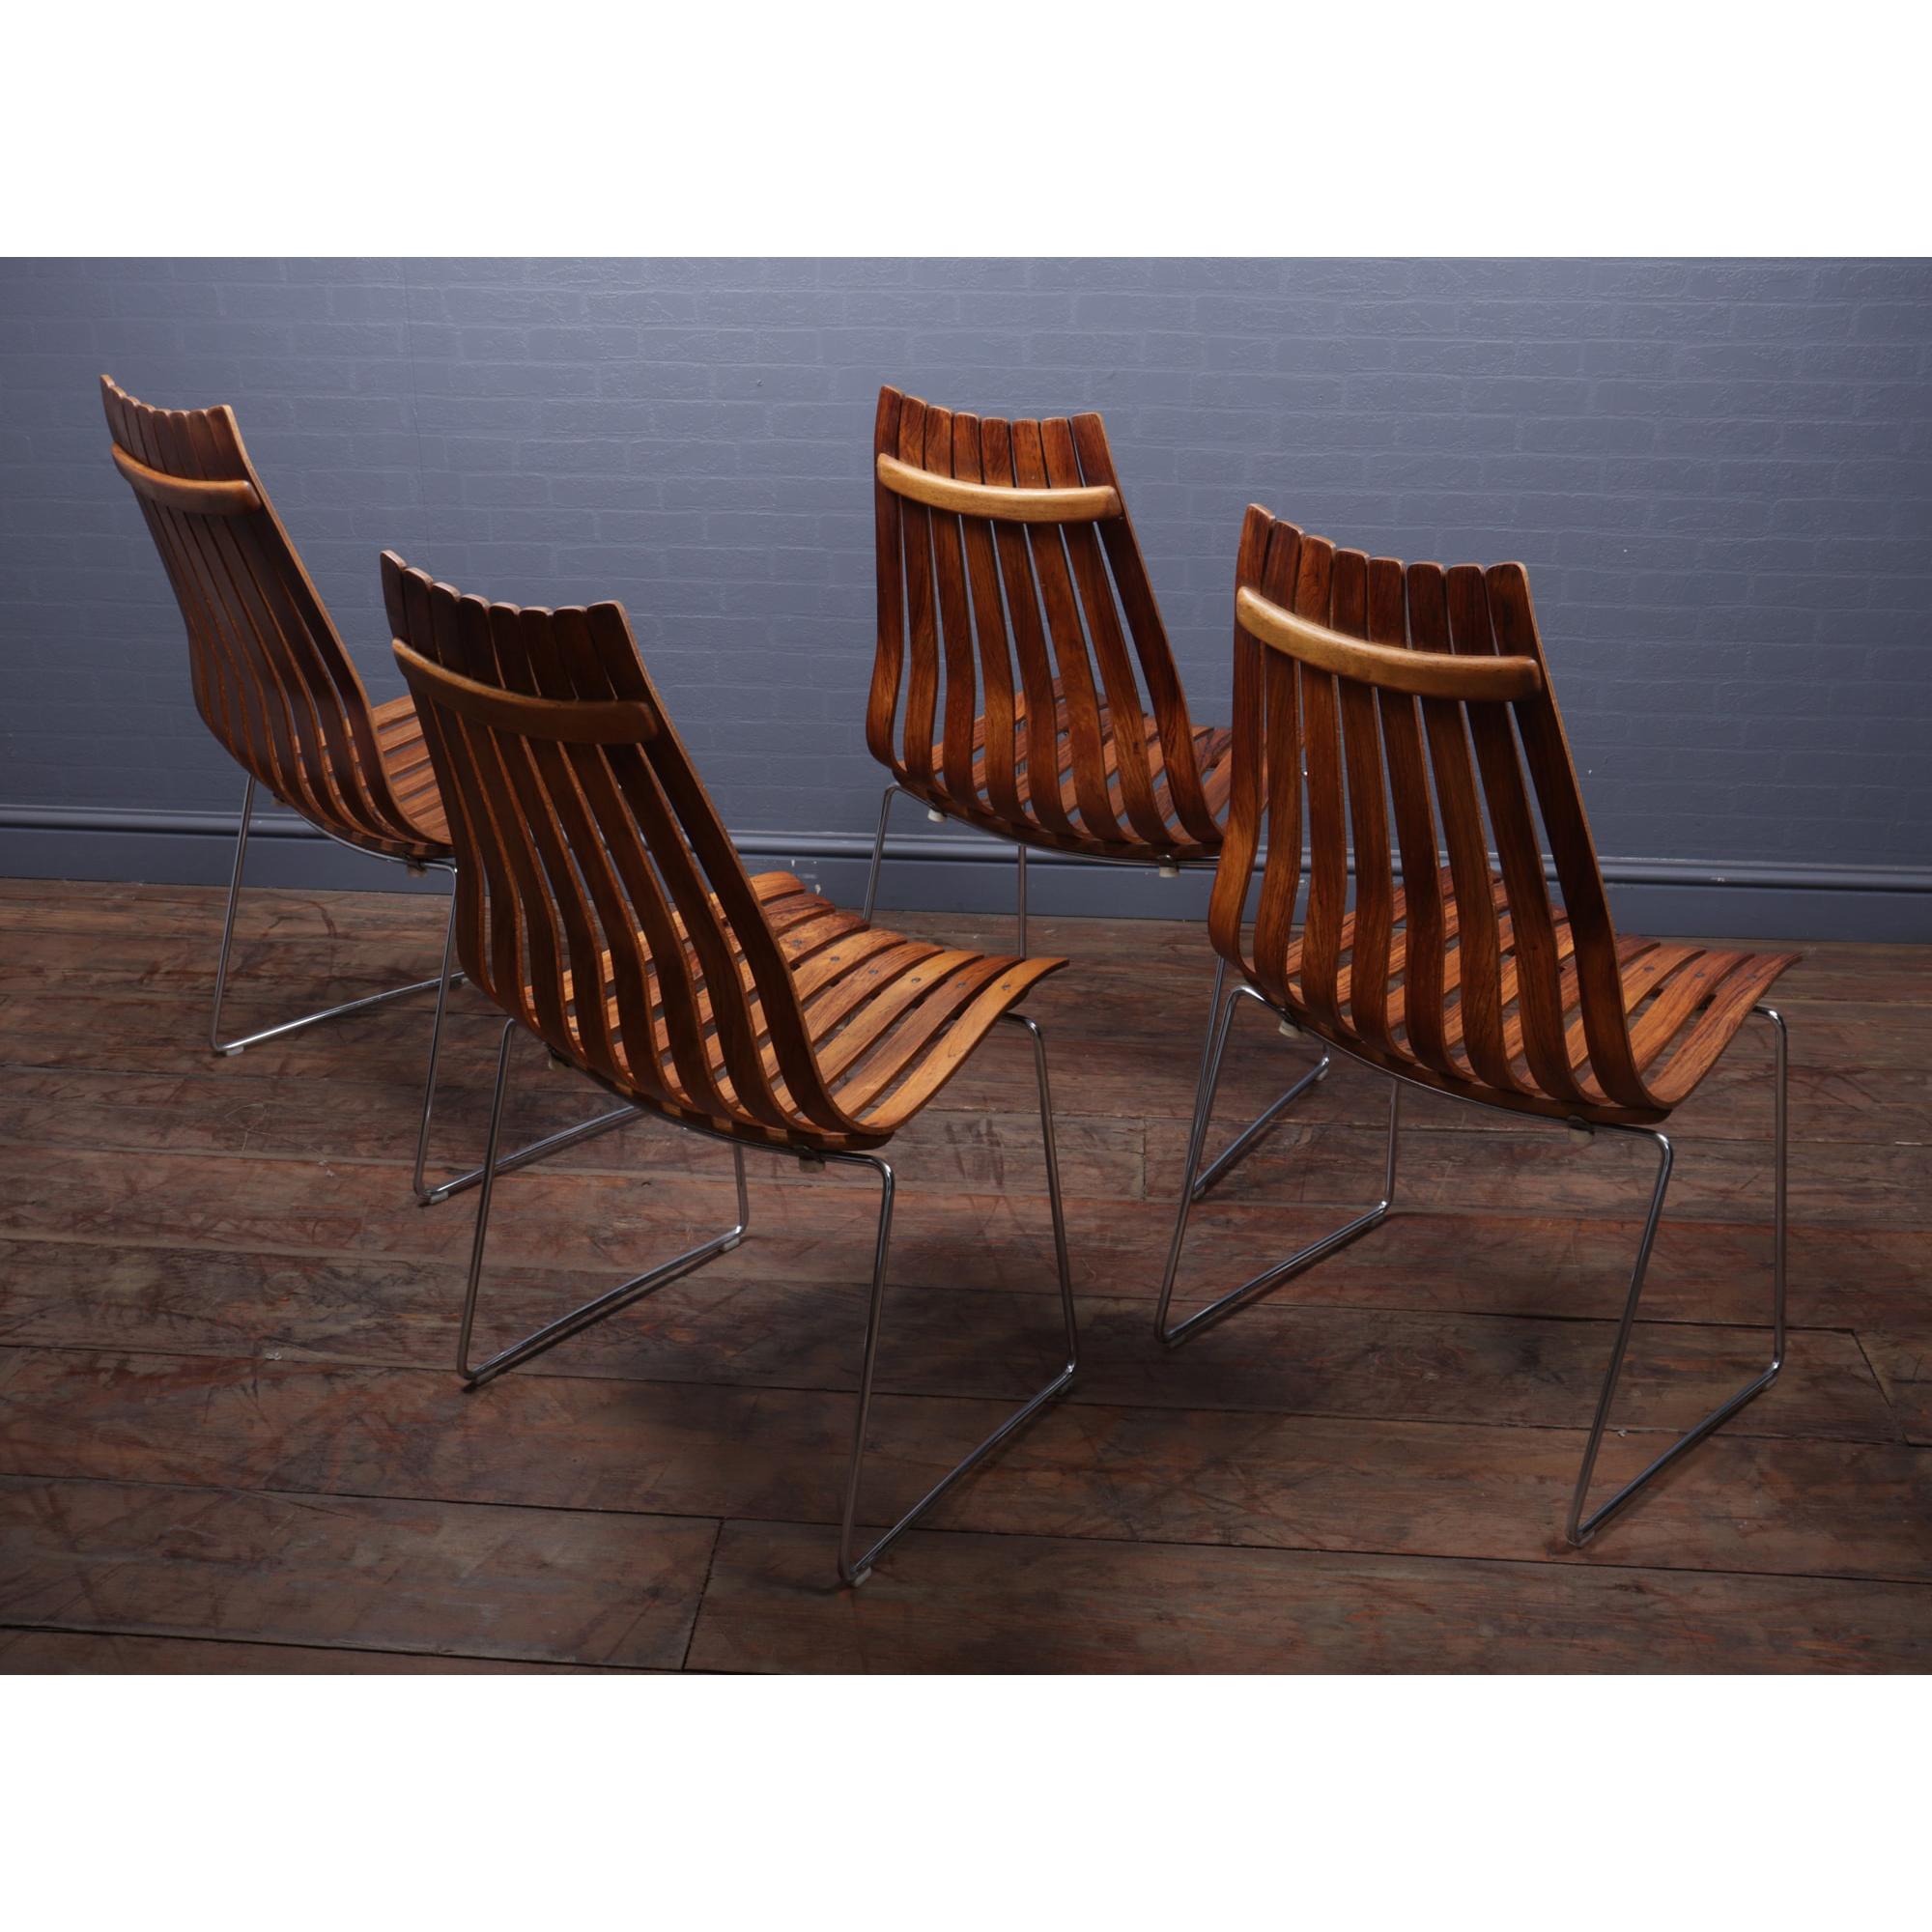 Mid century dining chairs by Hans Brattrud for Hove Mobler, Set of 4
A set of 4 Hans Brattrud rosewood Scandia High back chairs with padded seats and backs were produced by Hove Mobler in Norway in the 1960 The chairs have undergone light